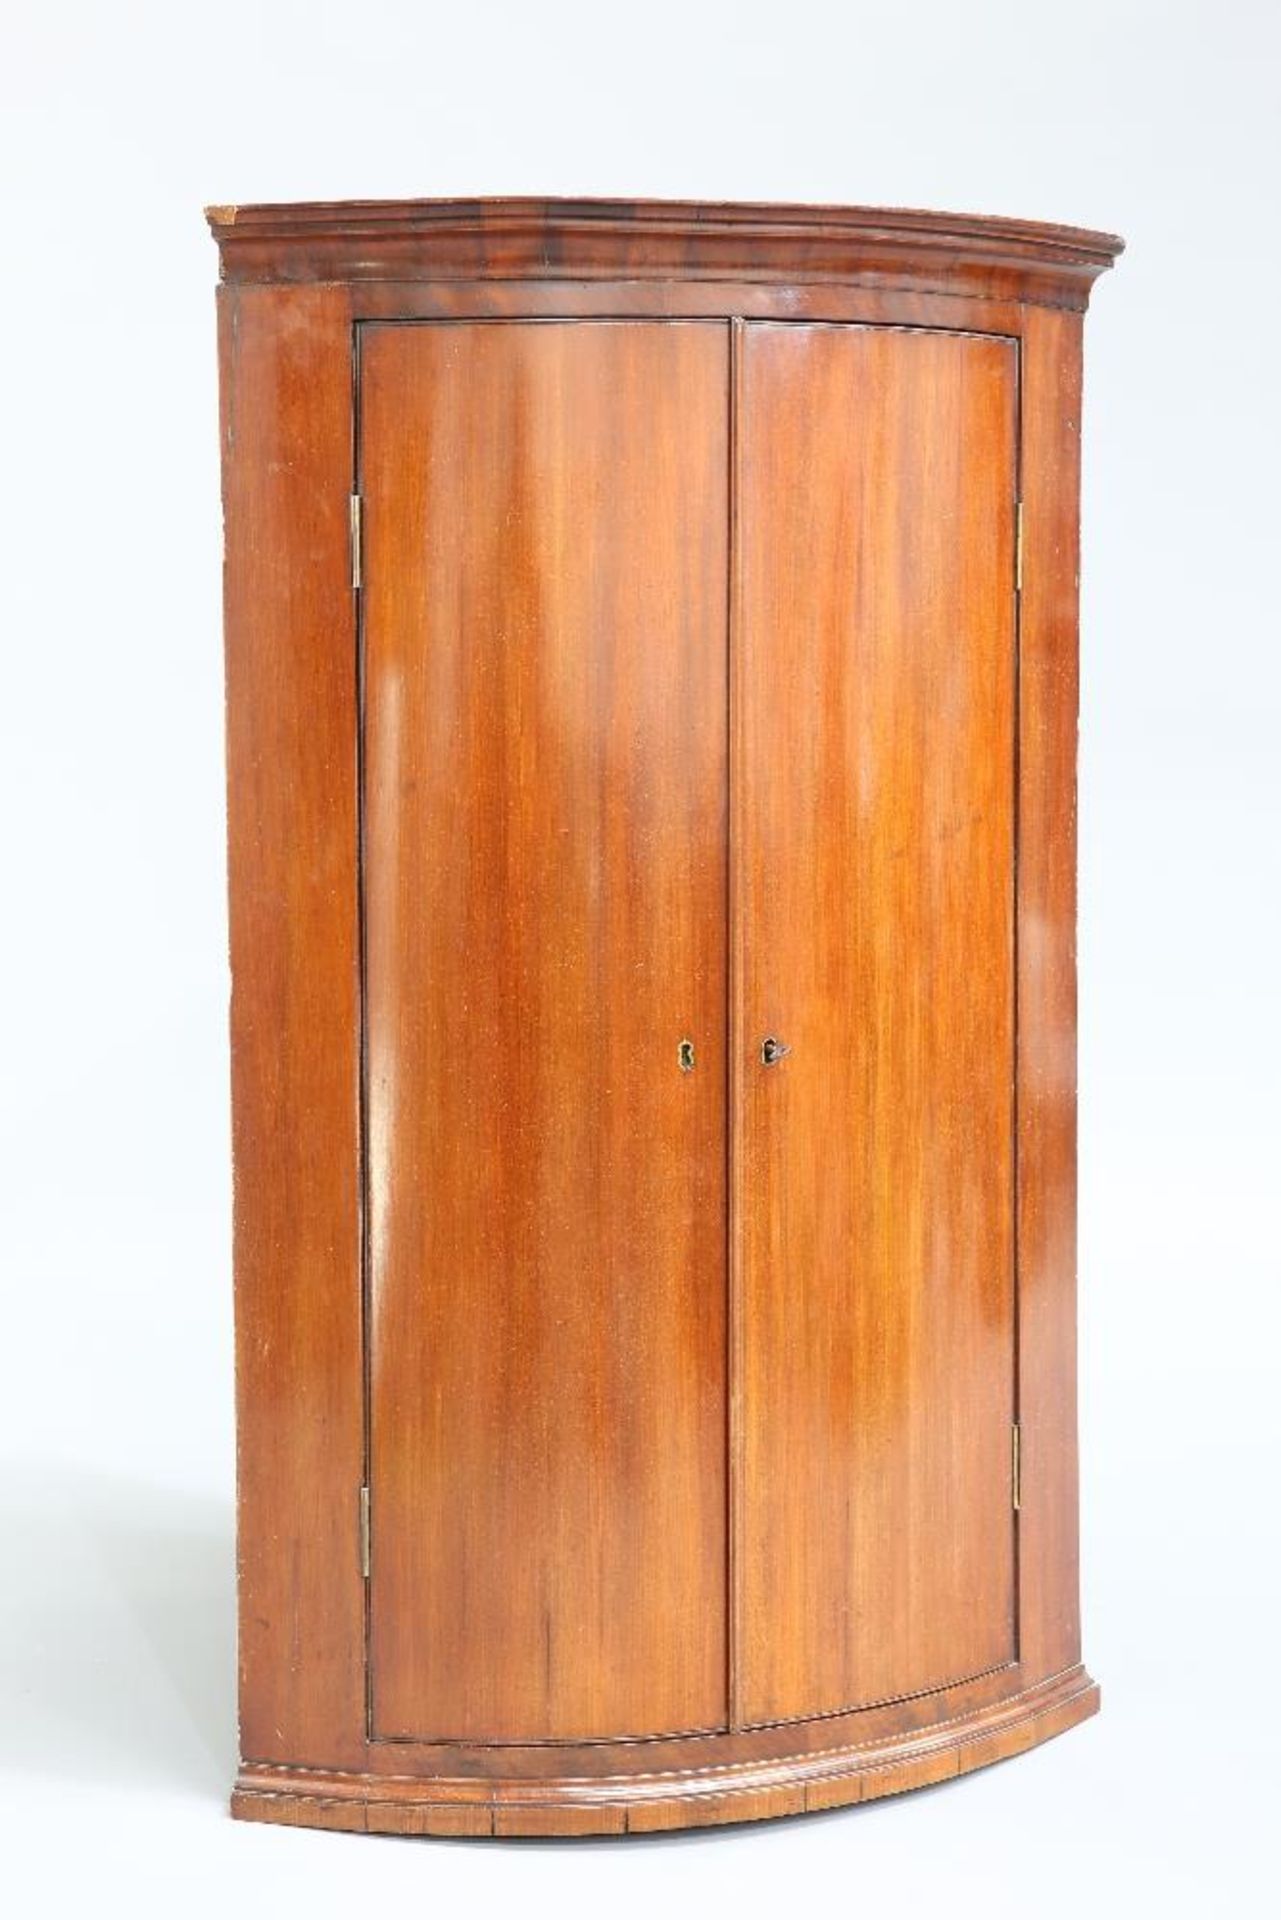 A GEORGE III MAHOGANY BOW FRONTED HANGING CORNER CUPBOARD